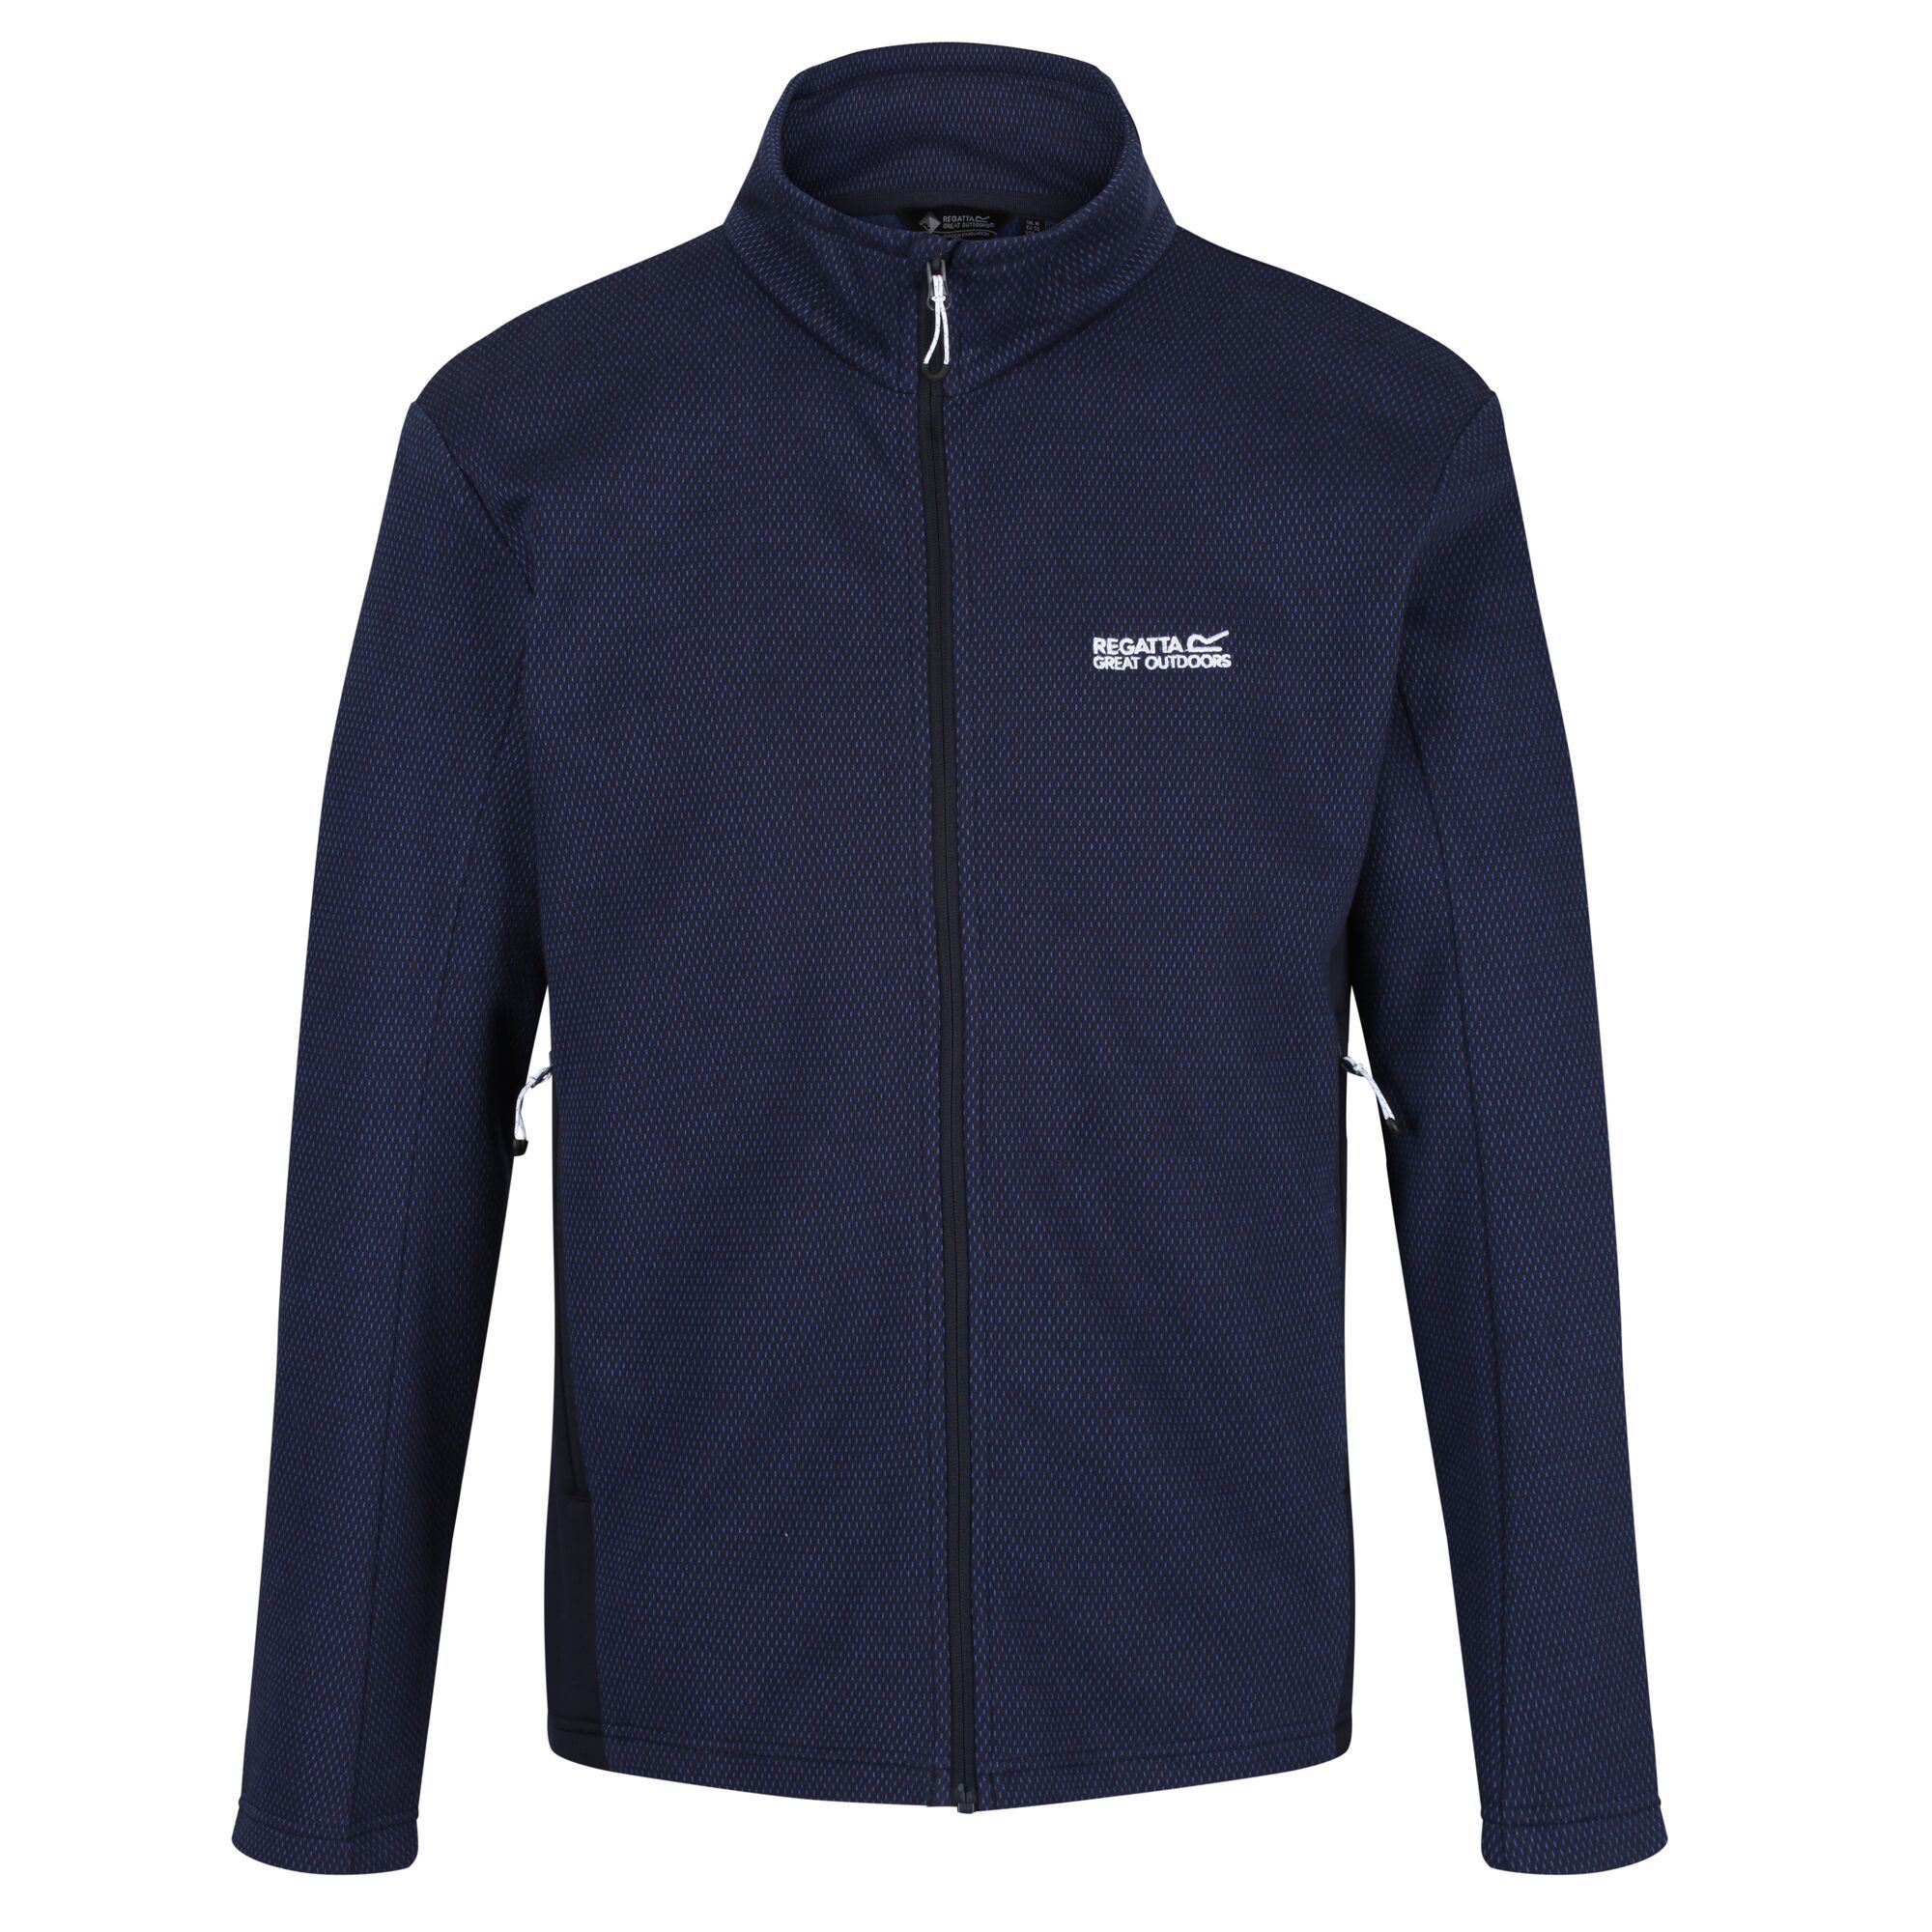 Material: 74% Cotton, 26% Polyester. Two-tone cotton blend fleece (230gsm) with Extol stretch side panels. Breeze blocking stand collar. Features 2 lower zipped pockets. Regatta logo embroidery on the chest.